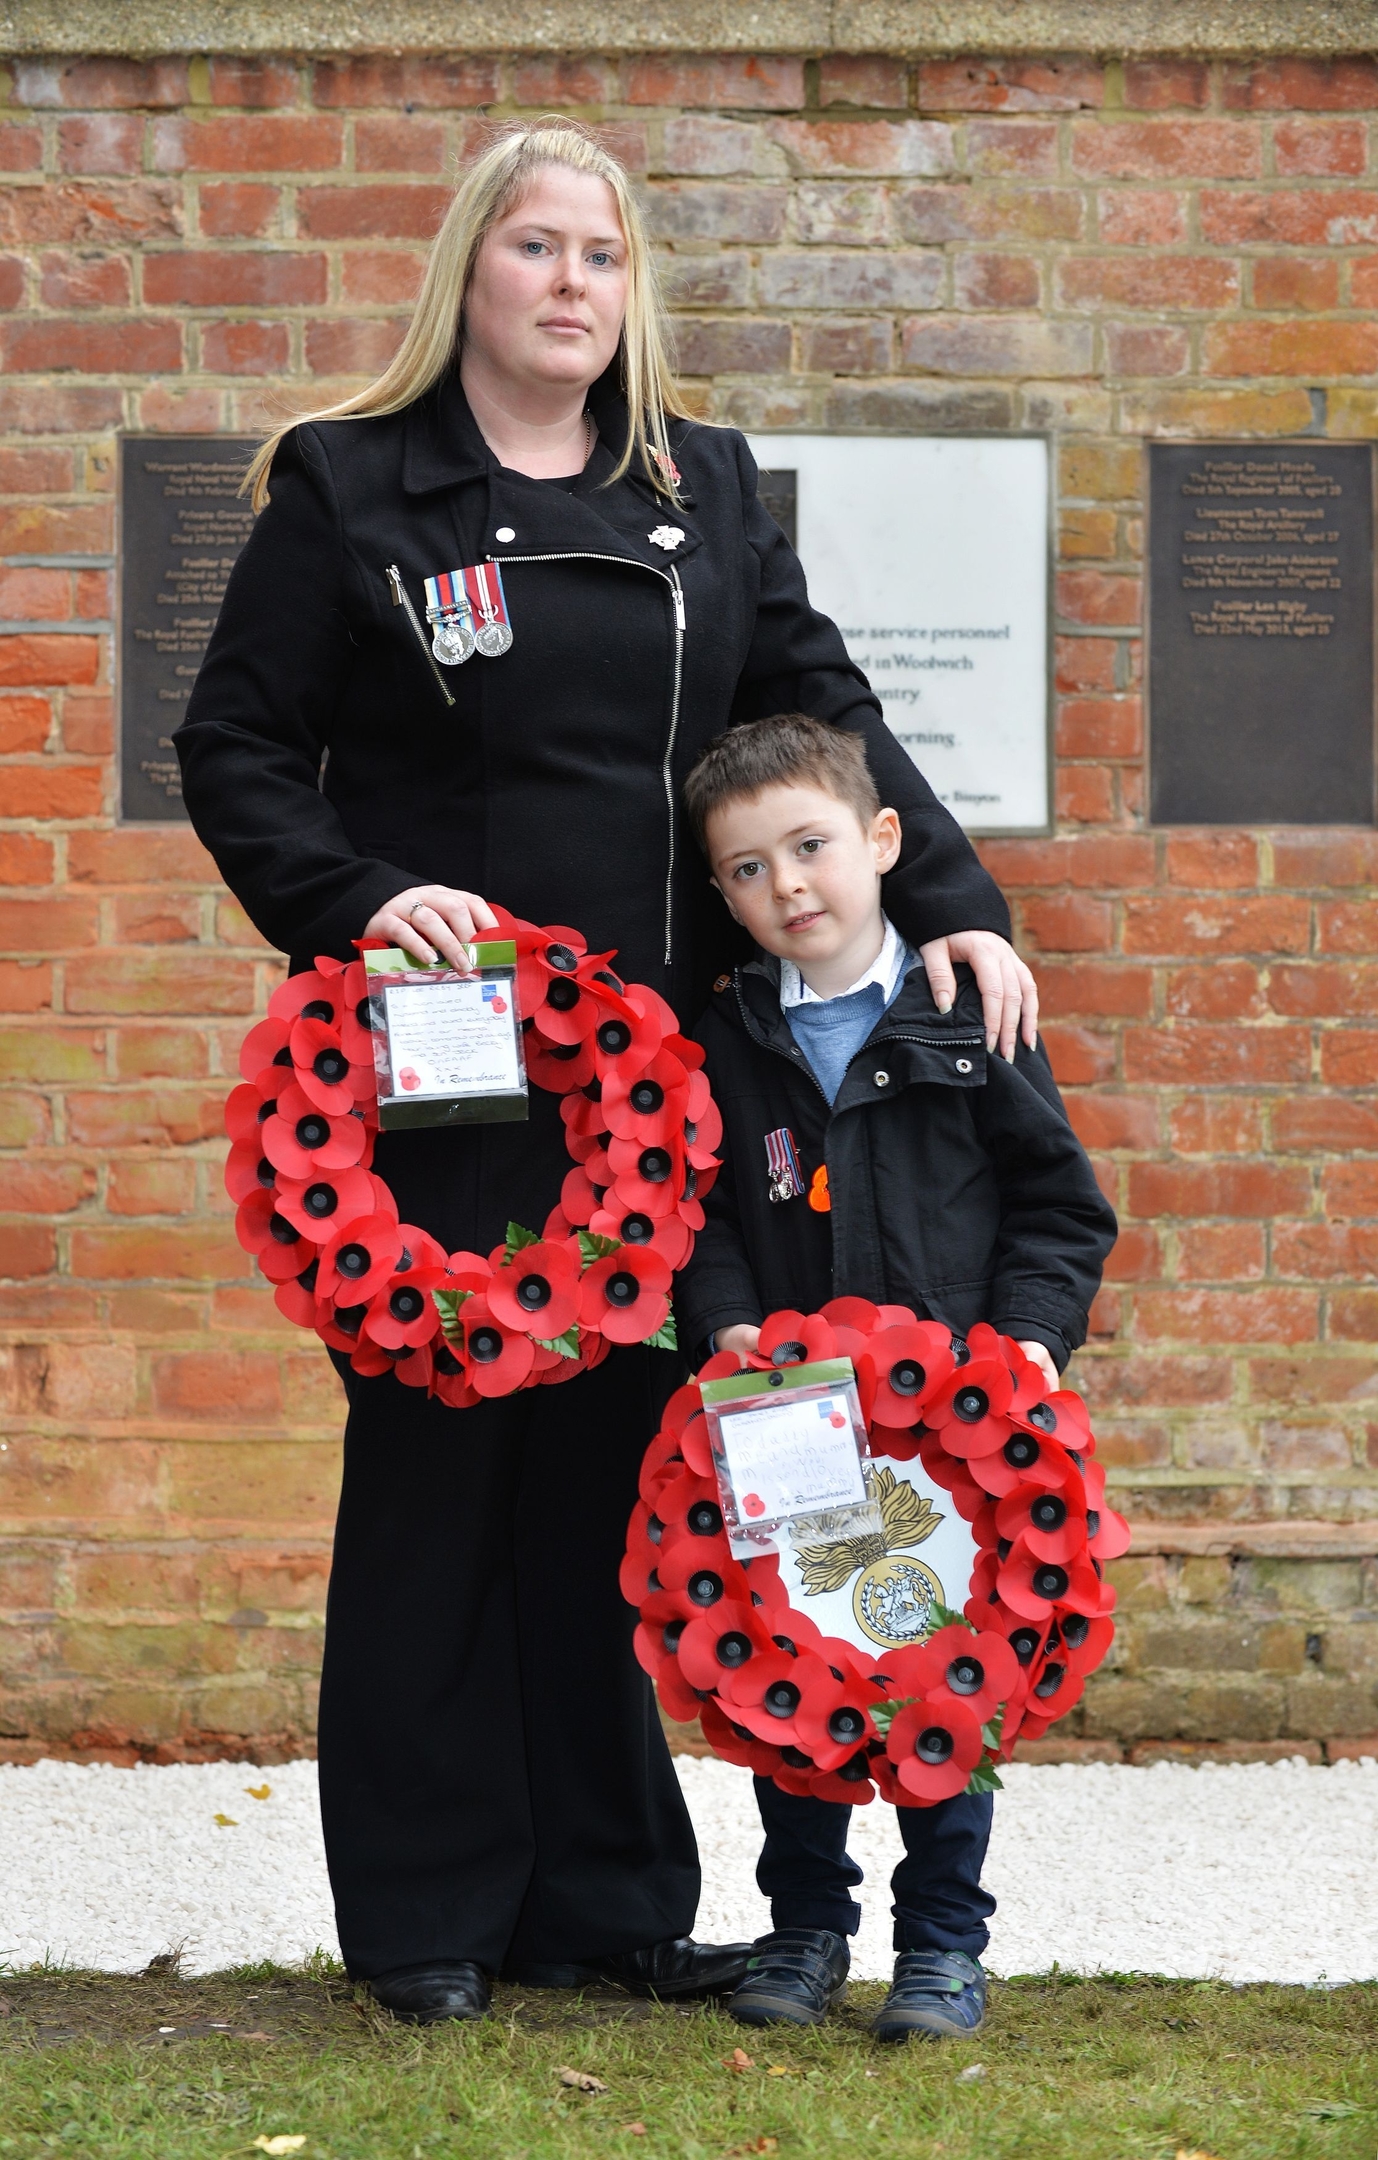 Handout photo issued by the MoD of Rebecca Rigby, the widow of murdered Fusilier Lee Rigby, and son Jack as they attend a service at St George's Chapel in Woolwich, to mark Armistice Day, the anniversary of the end of the First World War. 